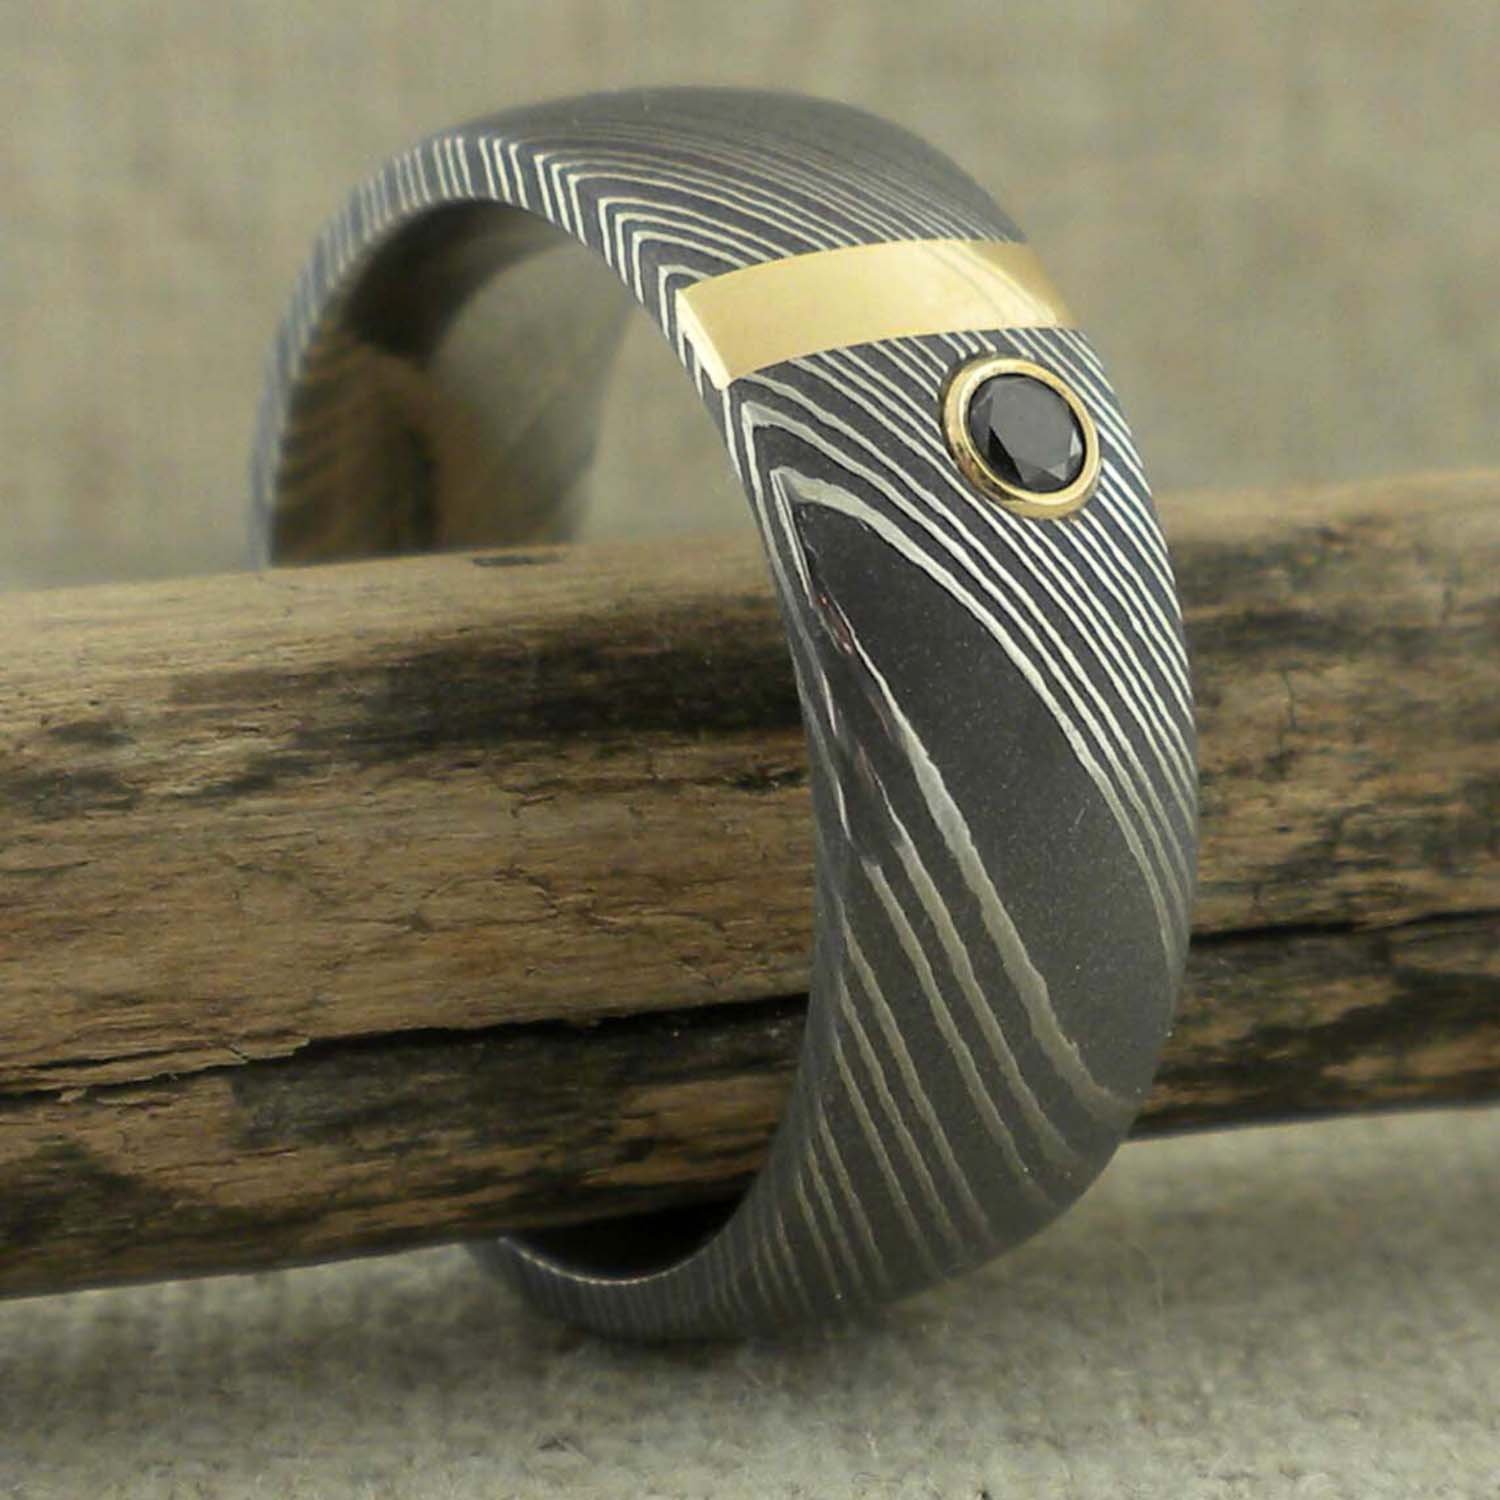 Damascus Steel Ring with 14K Yellow Gold Vertical Inlay and Black Diamond —  Unique Titanium Wedding Rings